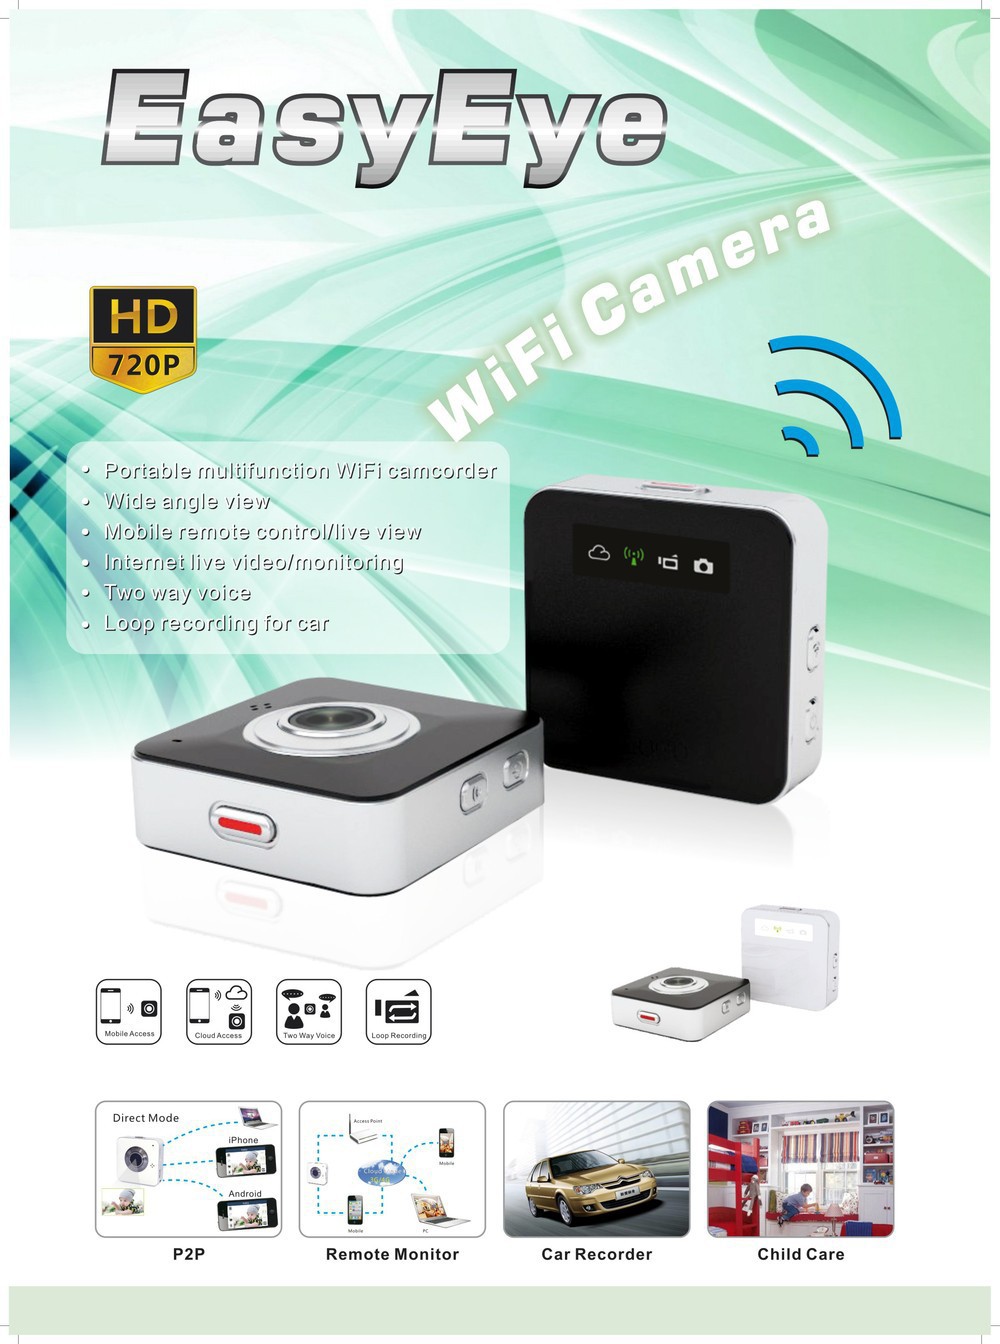 2014 NEW 720P Baby monitor E9000 Wireless WiFi Camera for iphone iOS Android Smartphone Remote Control